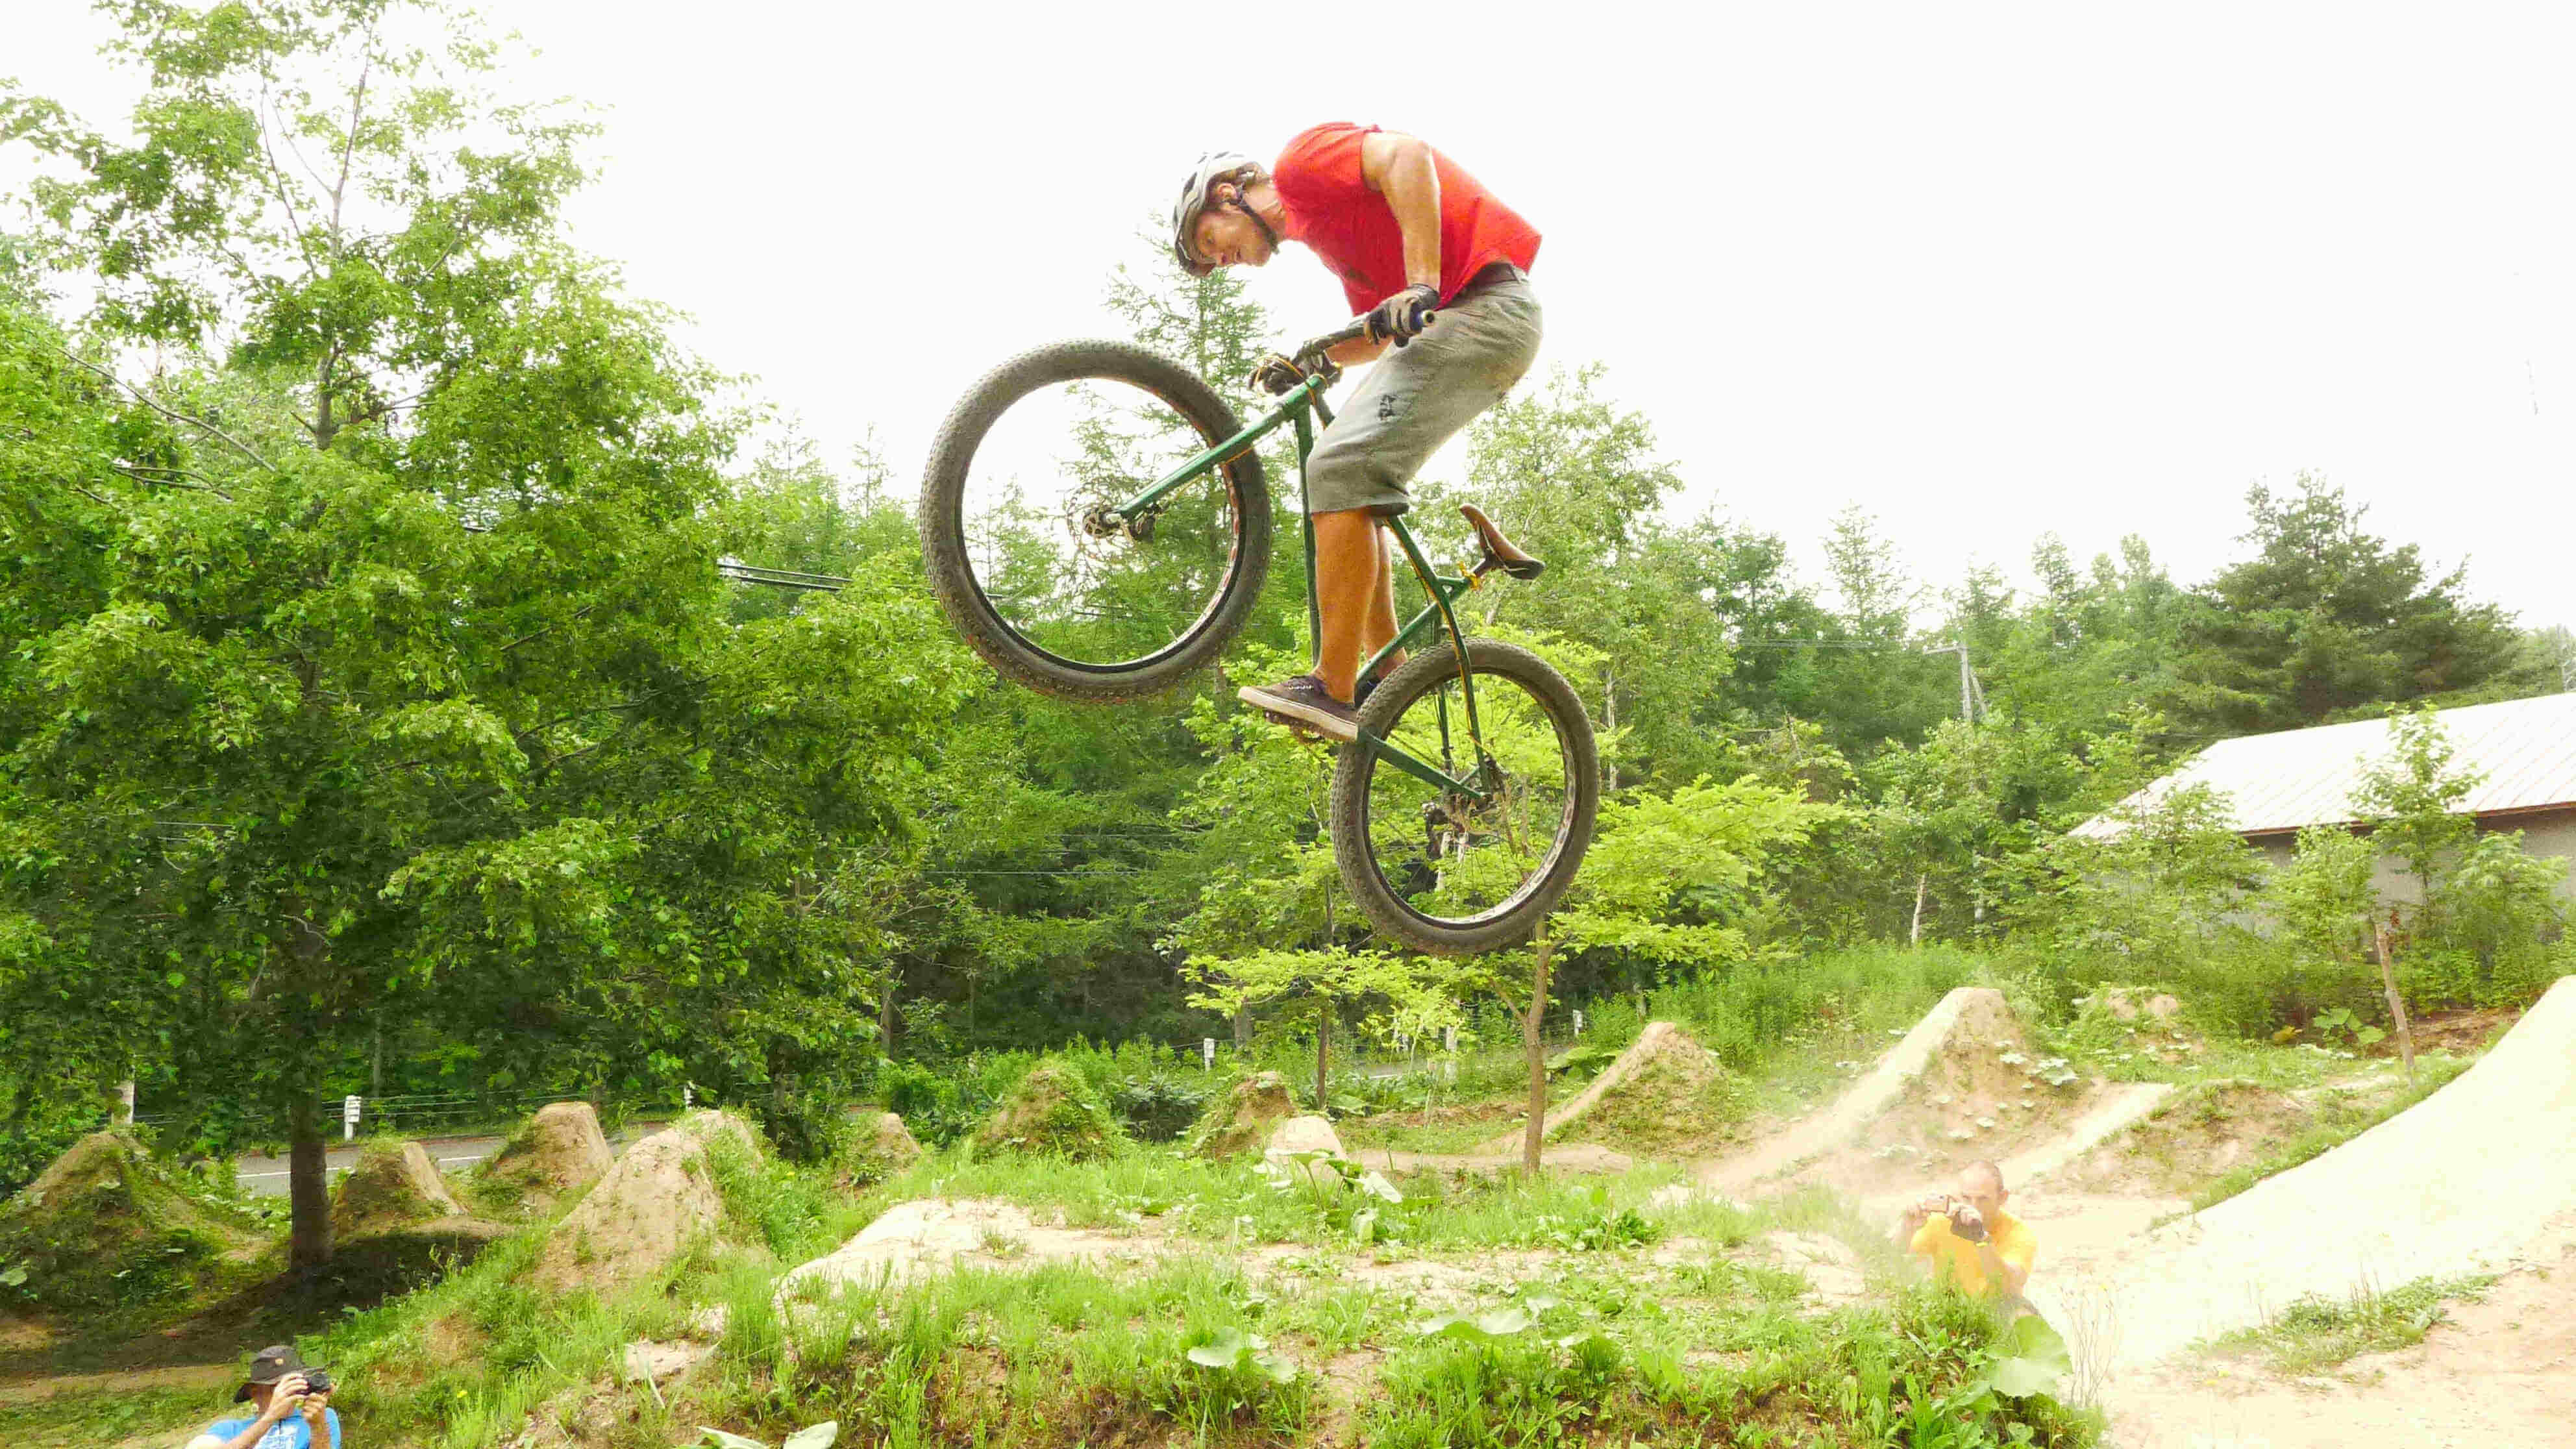 Left side view of a cyclist, riding a green Surly Krampus bike, flying off of a dirt ramp on a BMX track in the woods